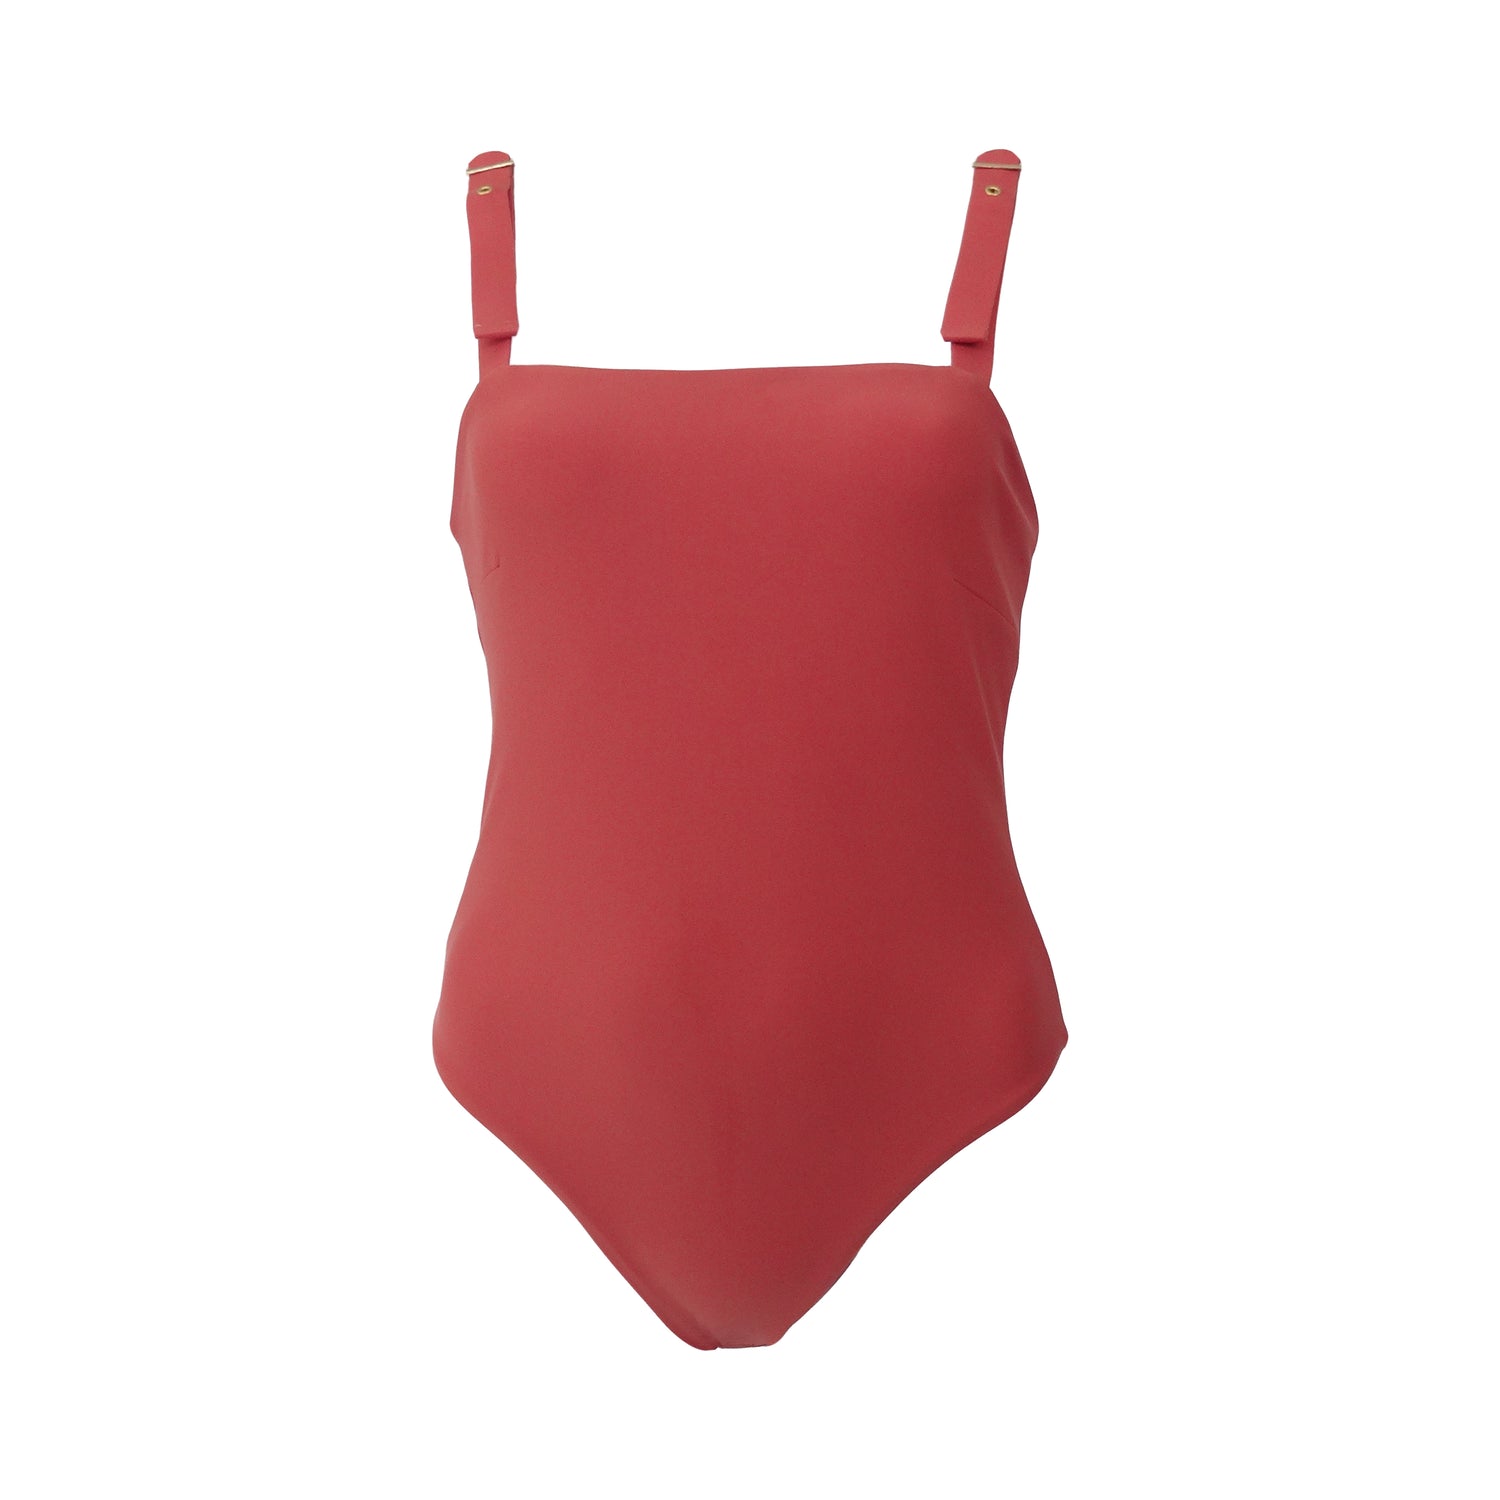 Terracotta straight square neck one piece swimsuit with adjustable gold belt buckle shoulder straps, high cut legs and cheeky bum coverage. 